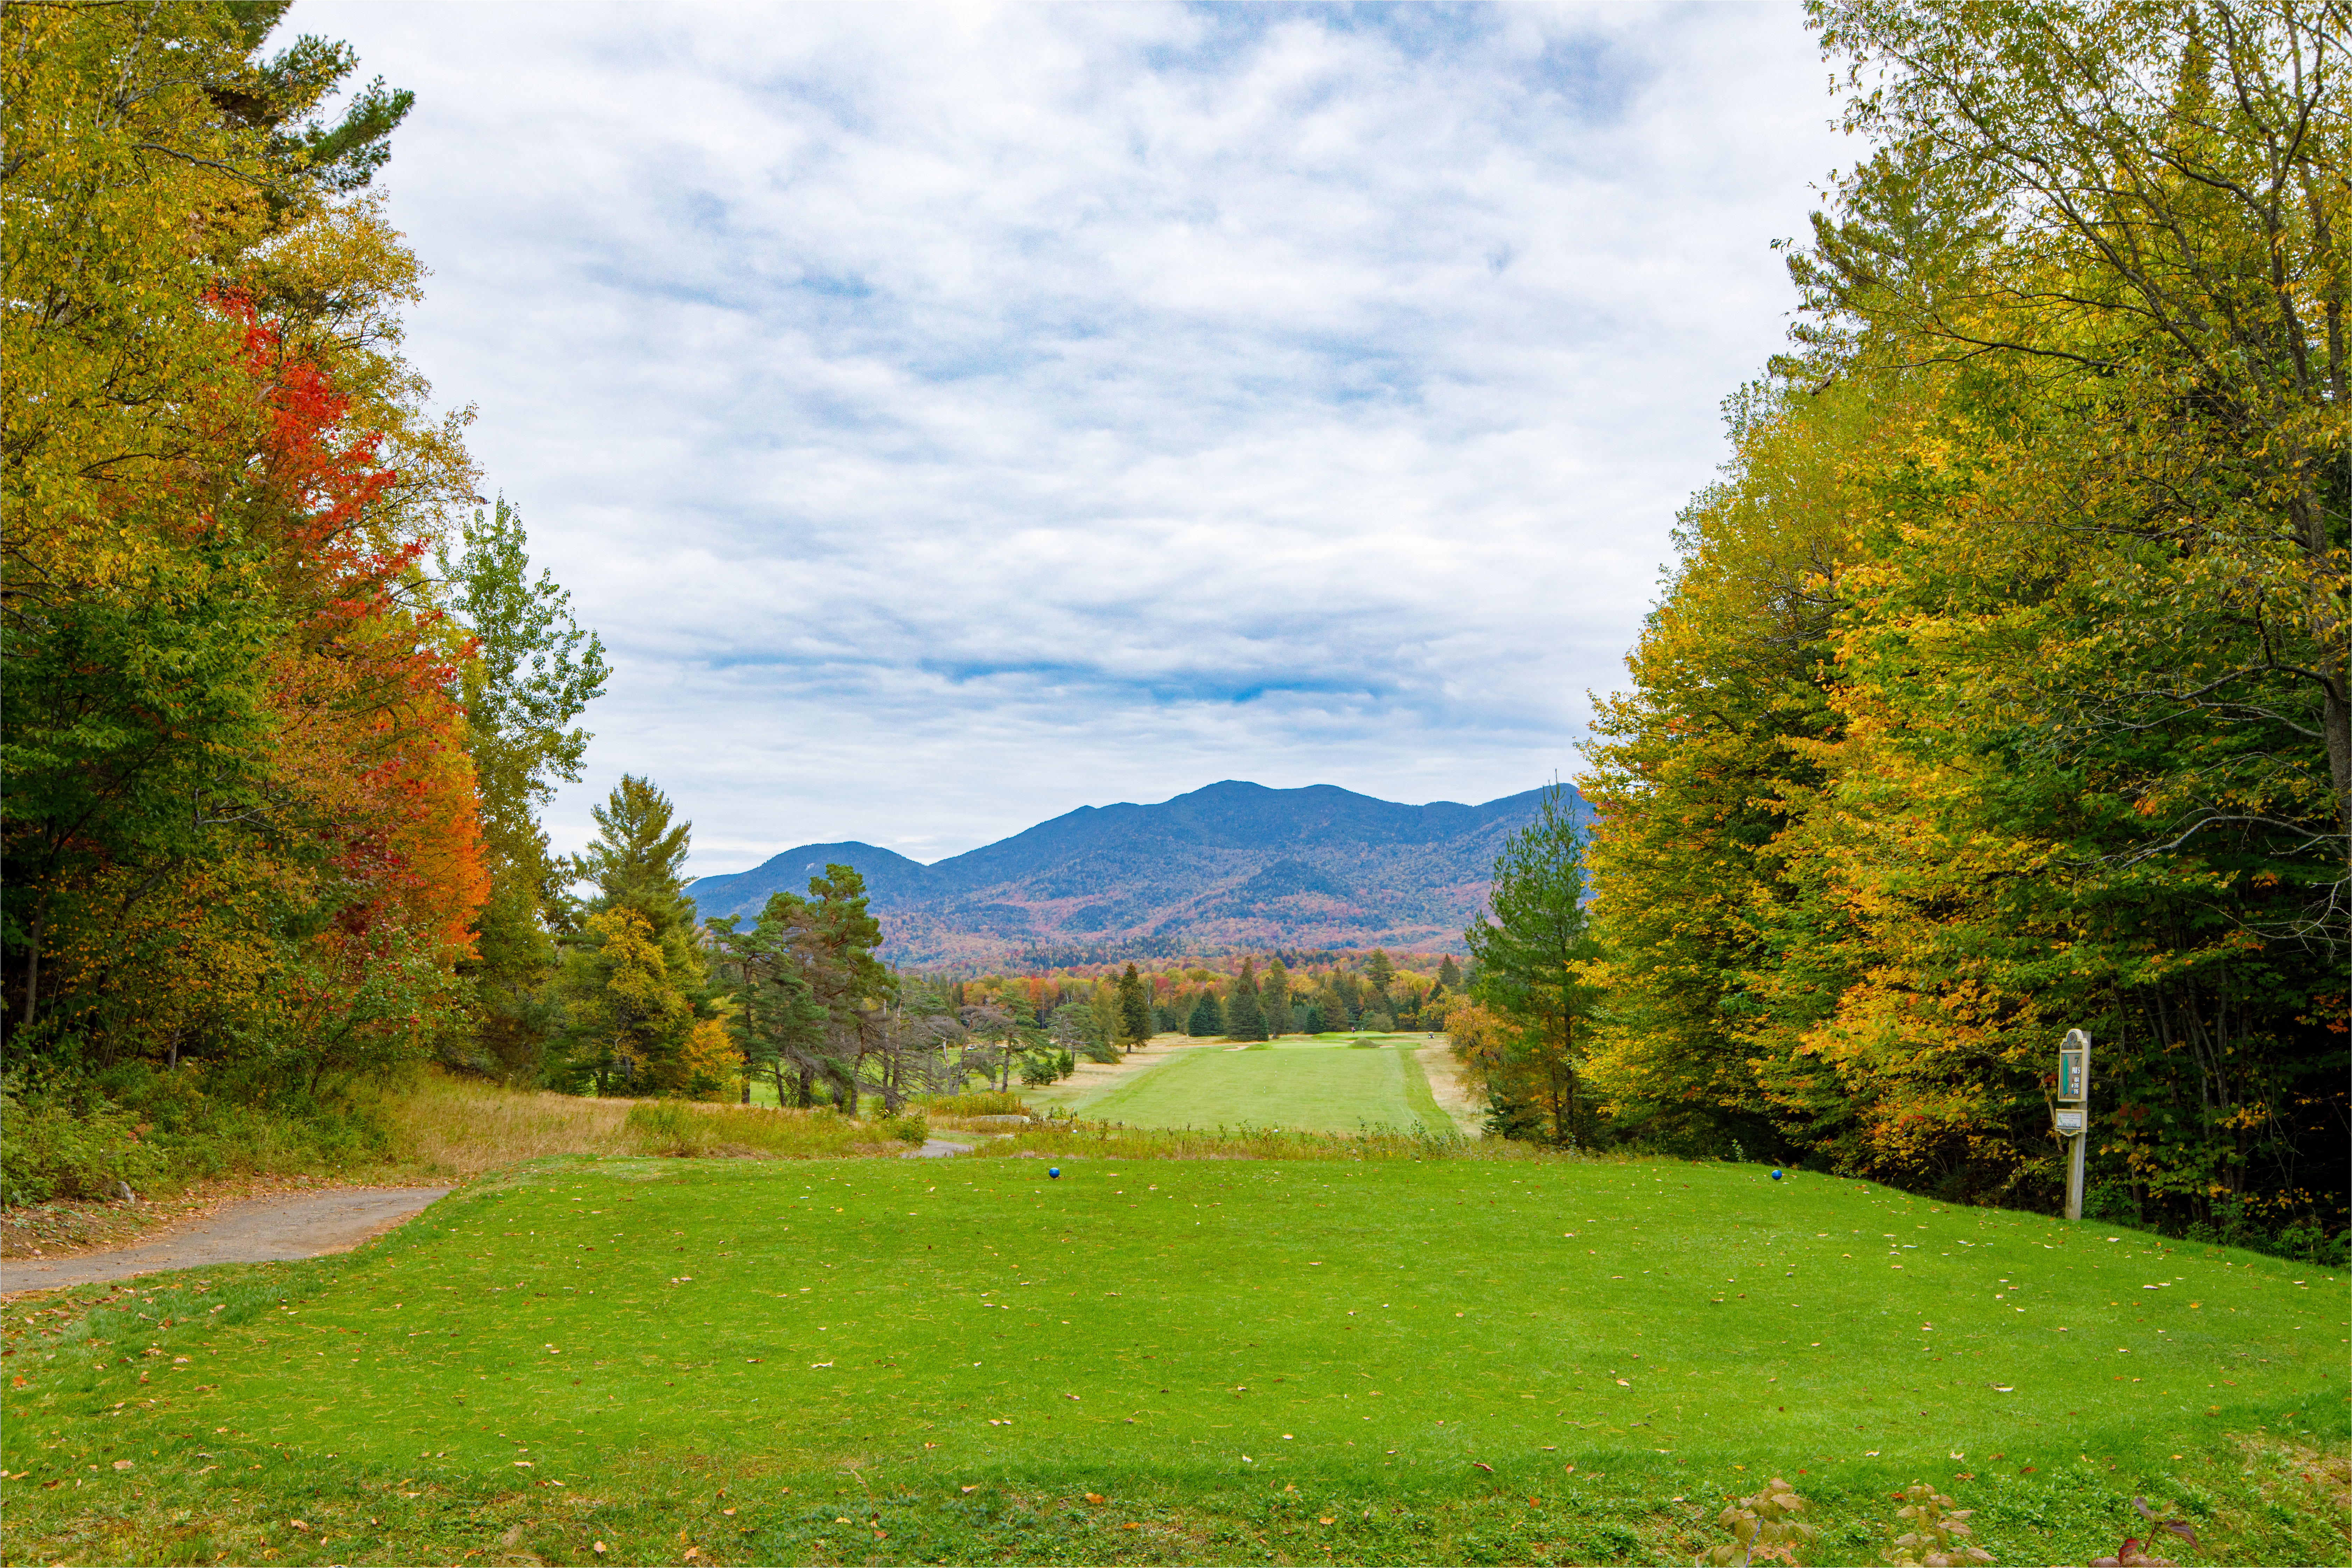 Golf course with views of the Adirondack Mountains